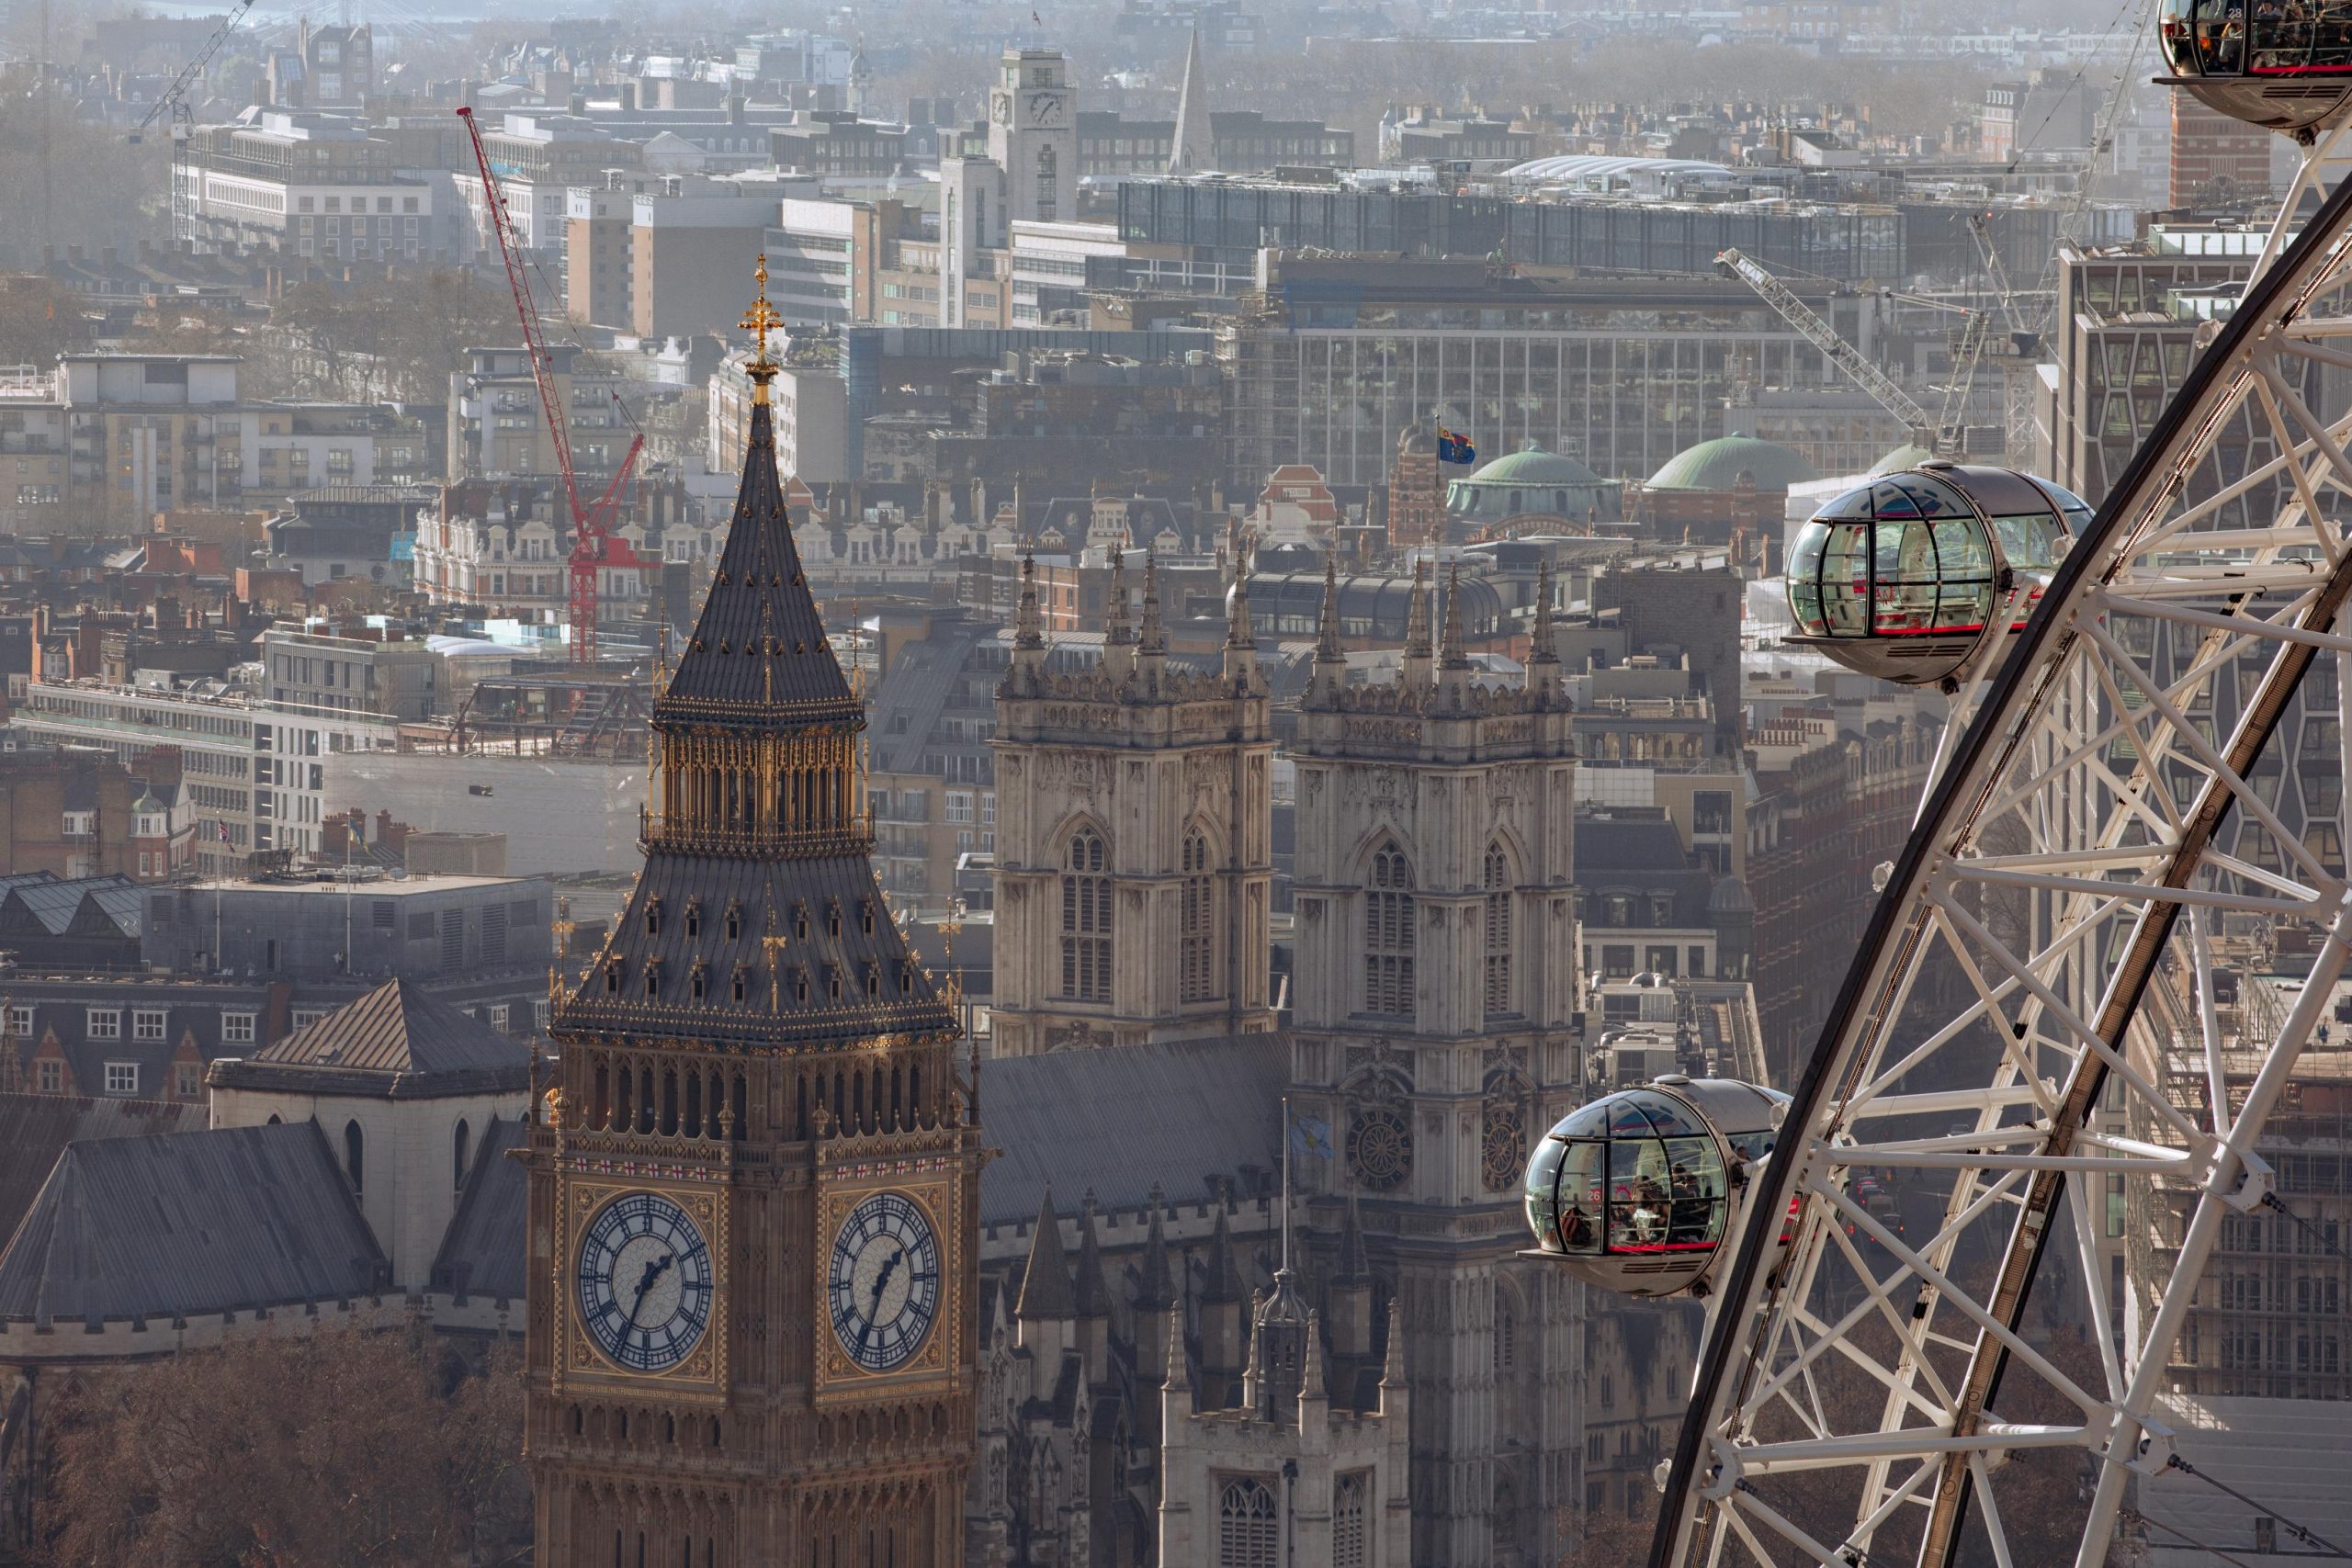 The London Eye’s long-term future secured